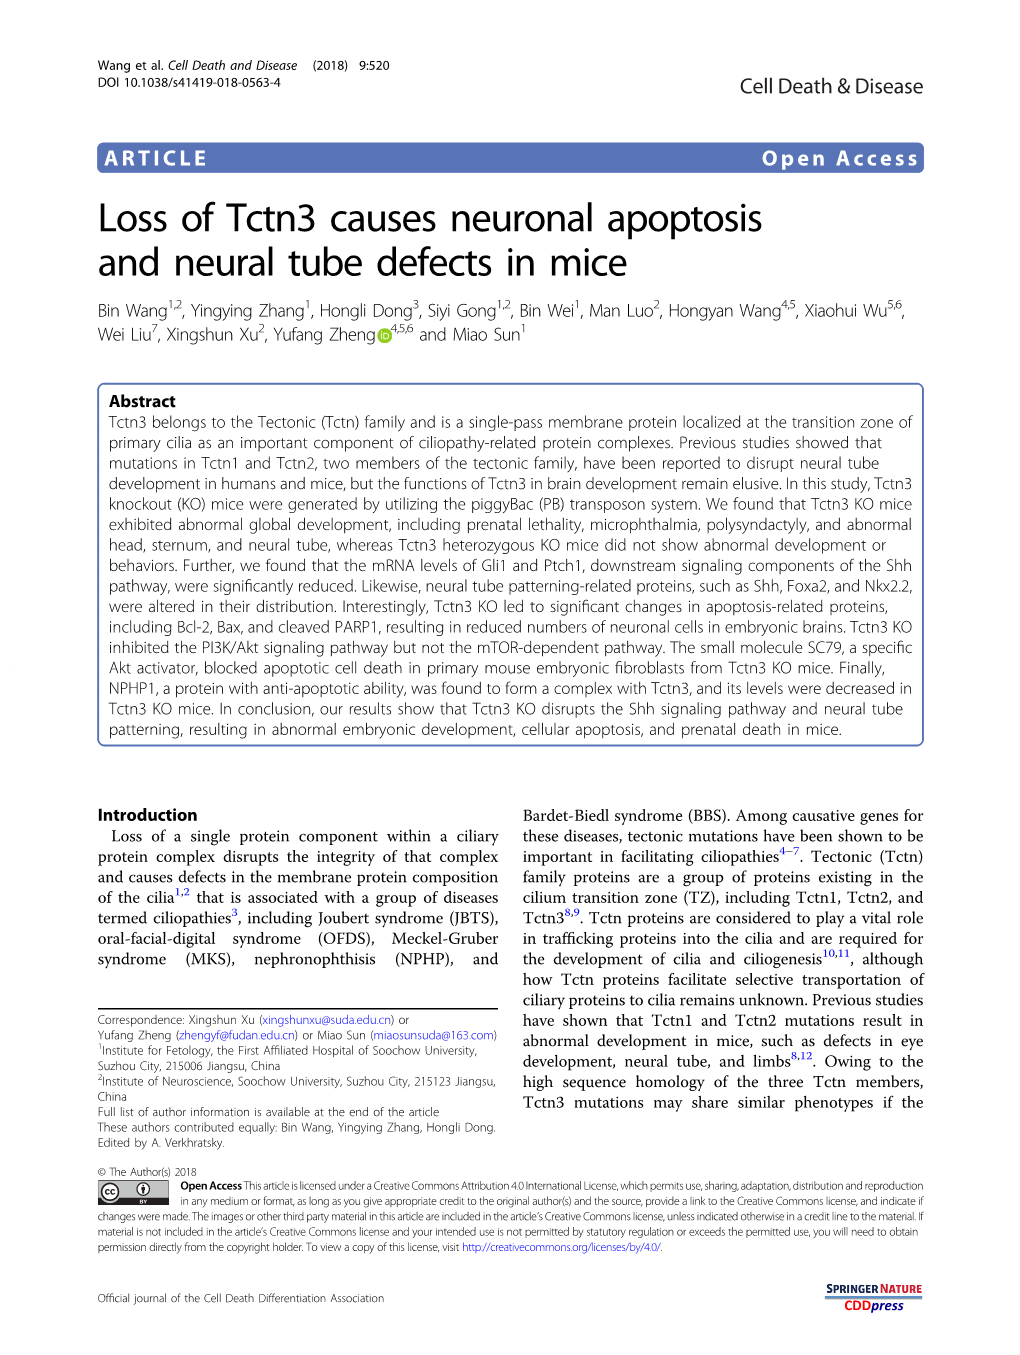 Loss of Tctn3 Causes Neuronal Apoptosis and Neural Tube Defects